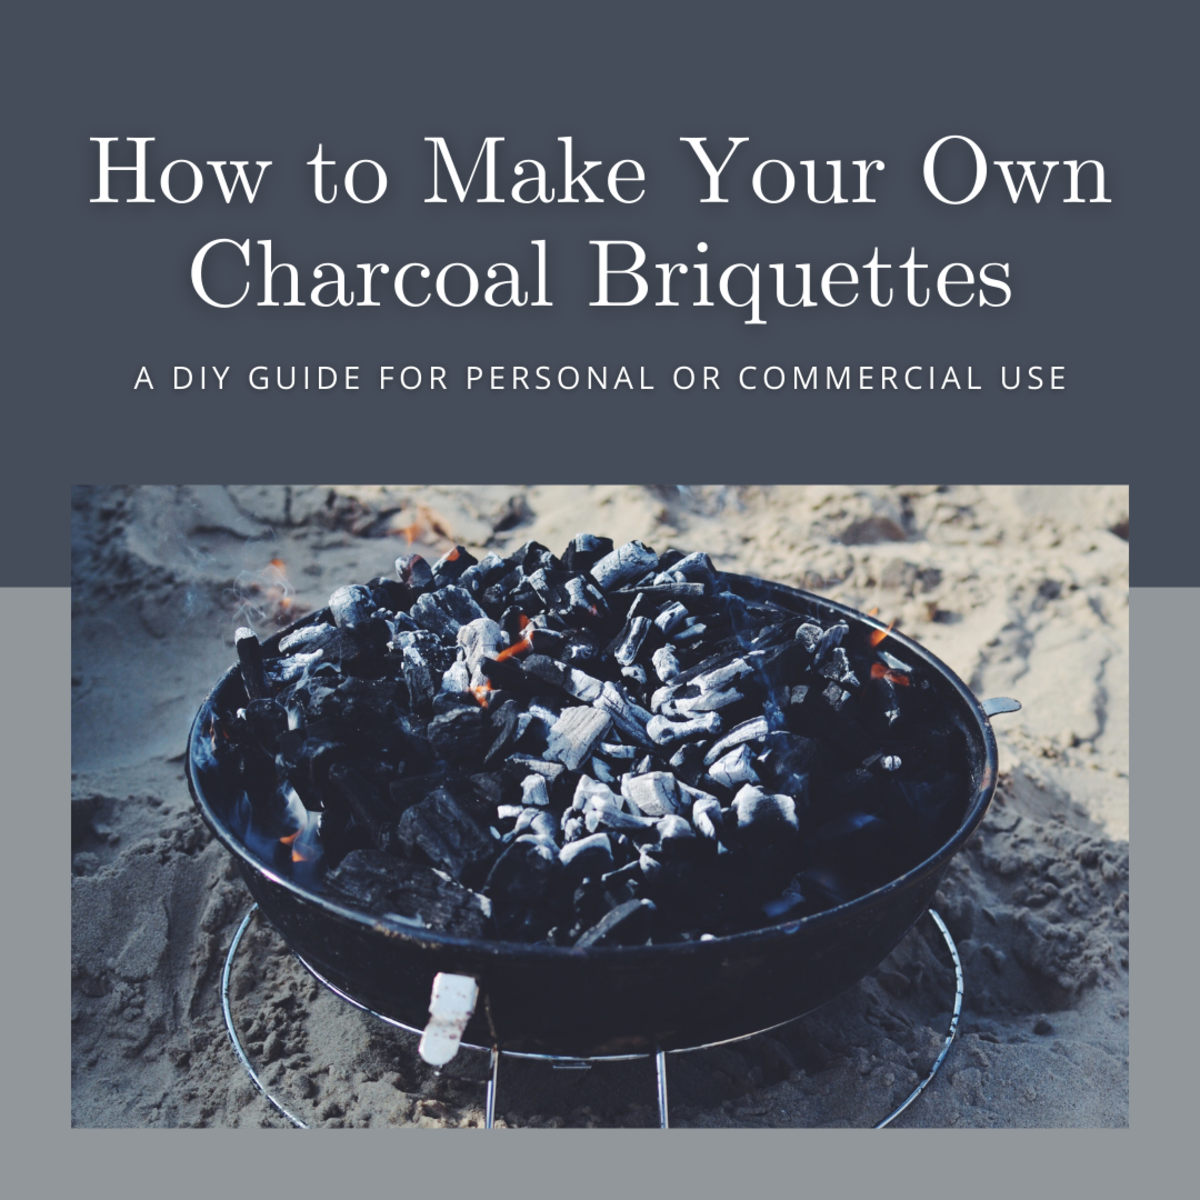 How to Make Your Own Charcoal Briquettes